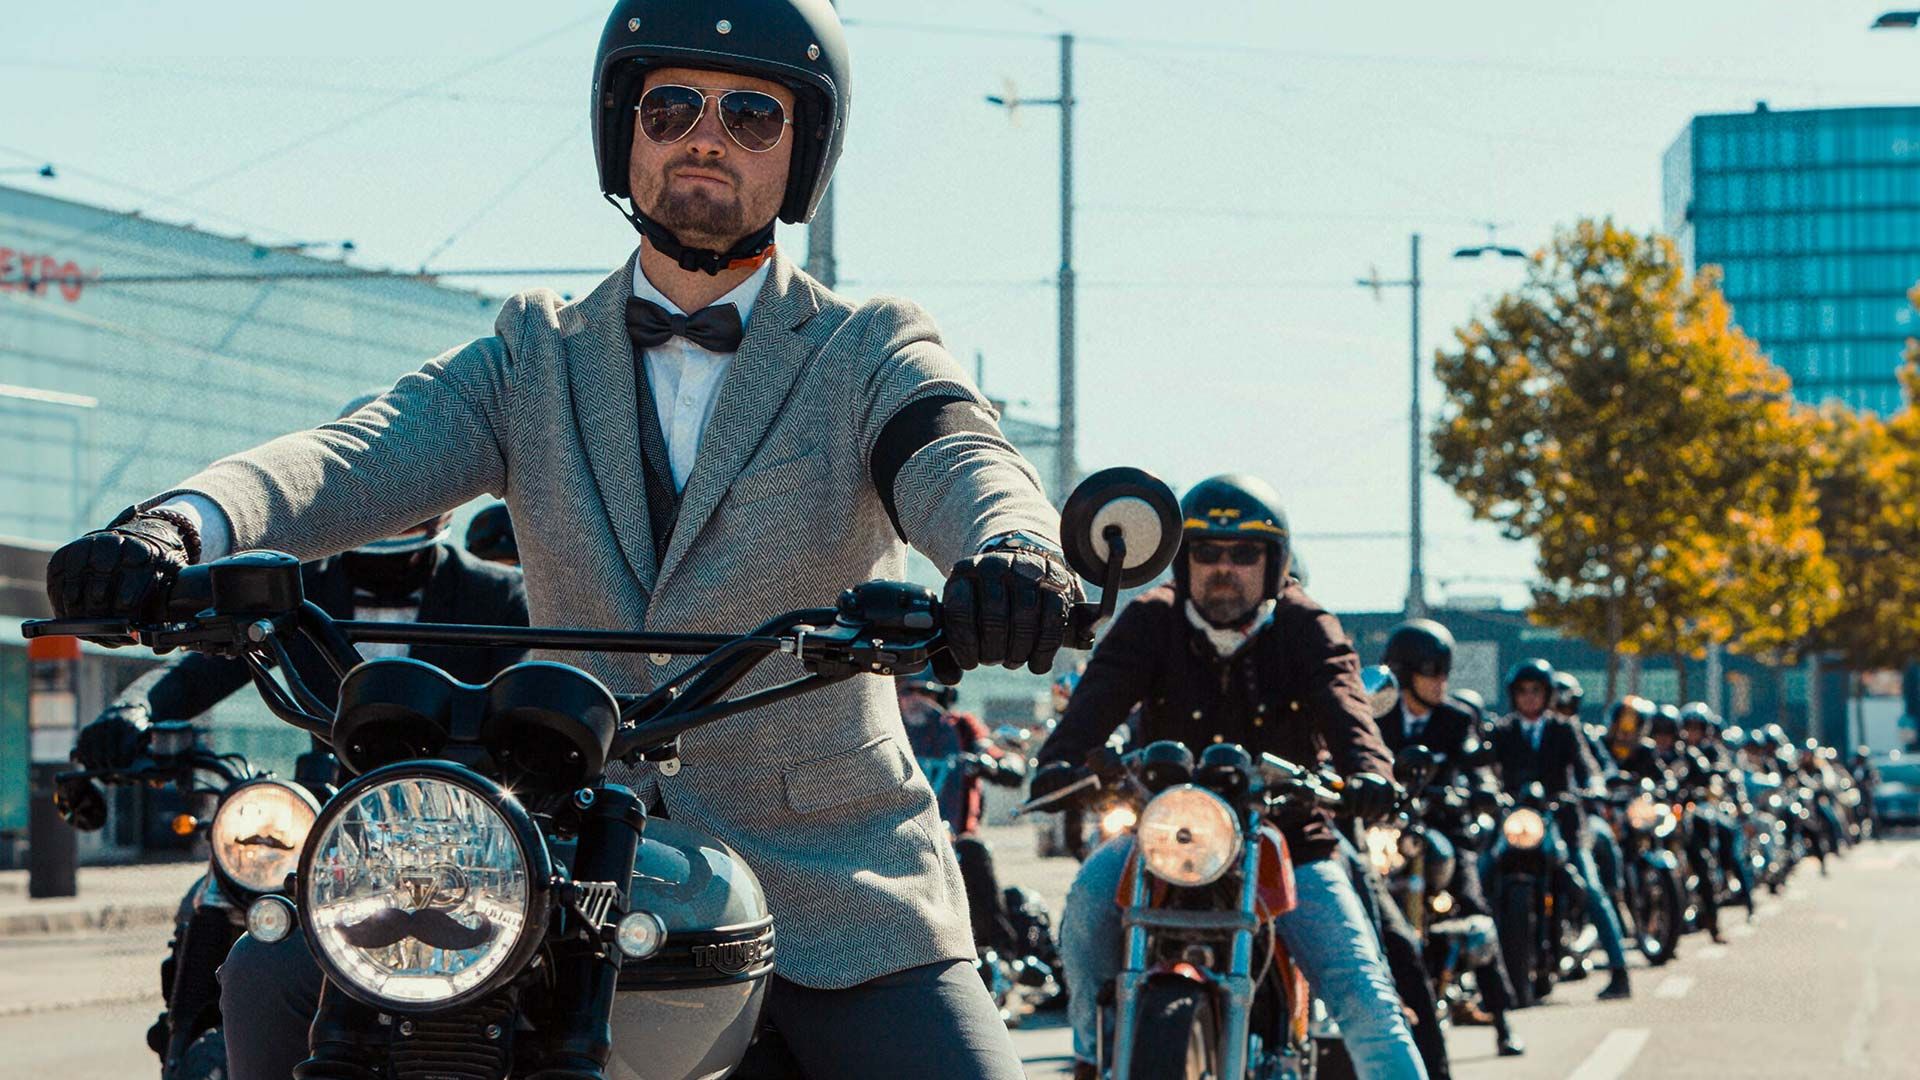 Photo of splendidly dressed, dapper motorcyclists riding at the Distinguished Gentleman's Ride.